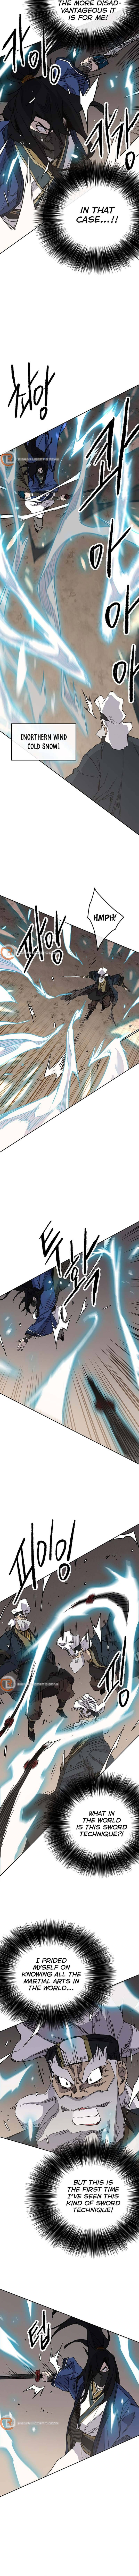 The Undefeatable Swordsman Chapter 157 page 6